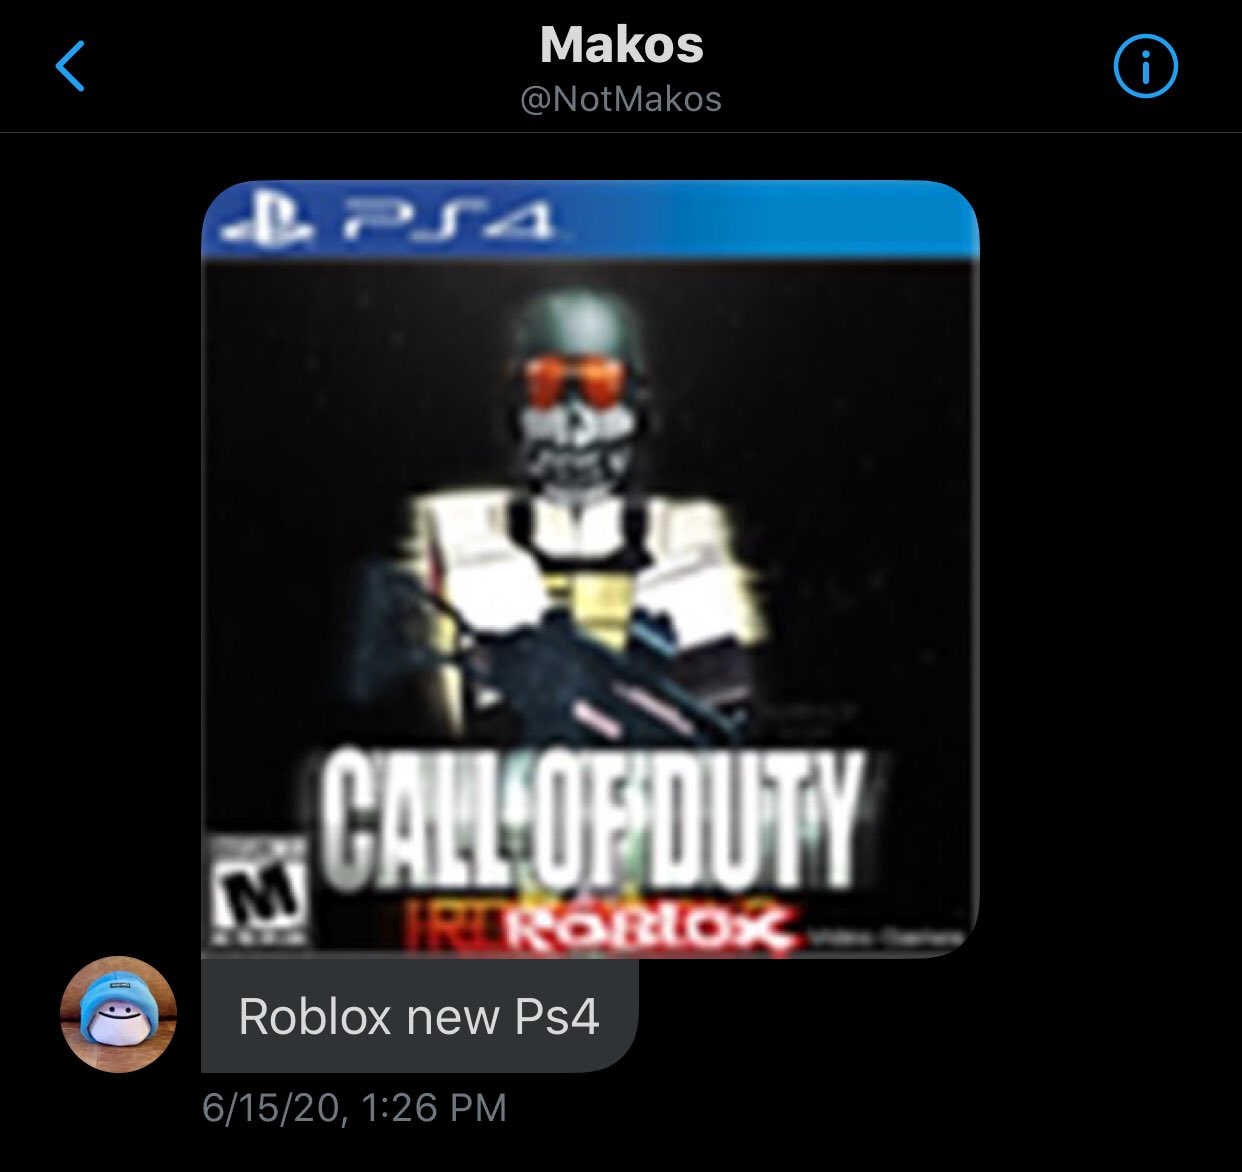 News Roblox On Twitter Call Of Duty Is Now Available On Roblox Ps4 - roblox game in ps4